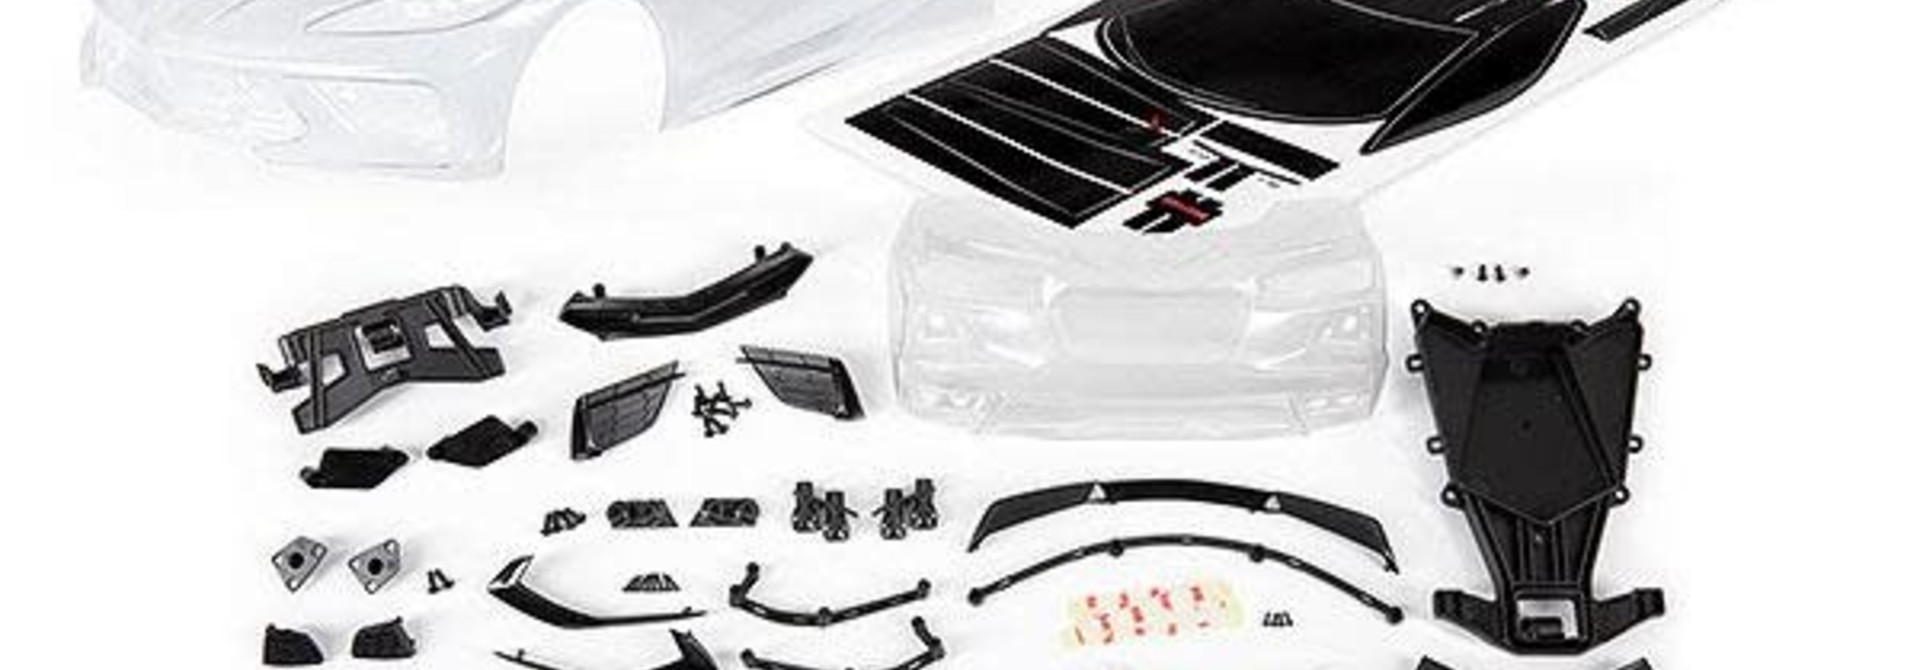 Body, Chevrolet Corvette Stingray (clear, trimmed, requires painting)/ decal sheet (includes side mirrors, spoiler, grilles, vents, hardware, & clipless mounting)